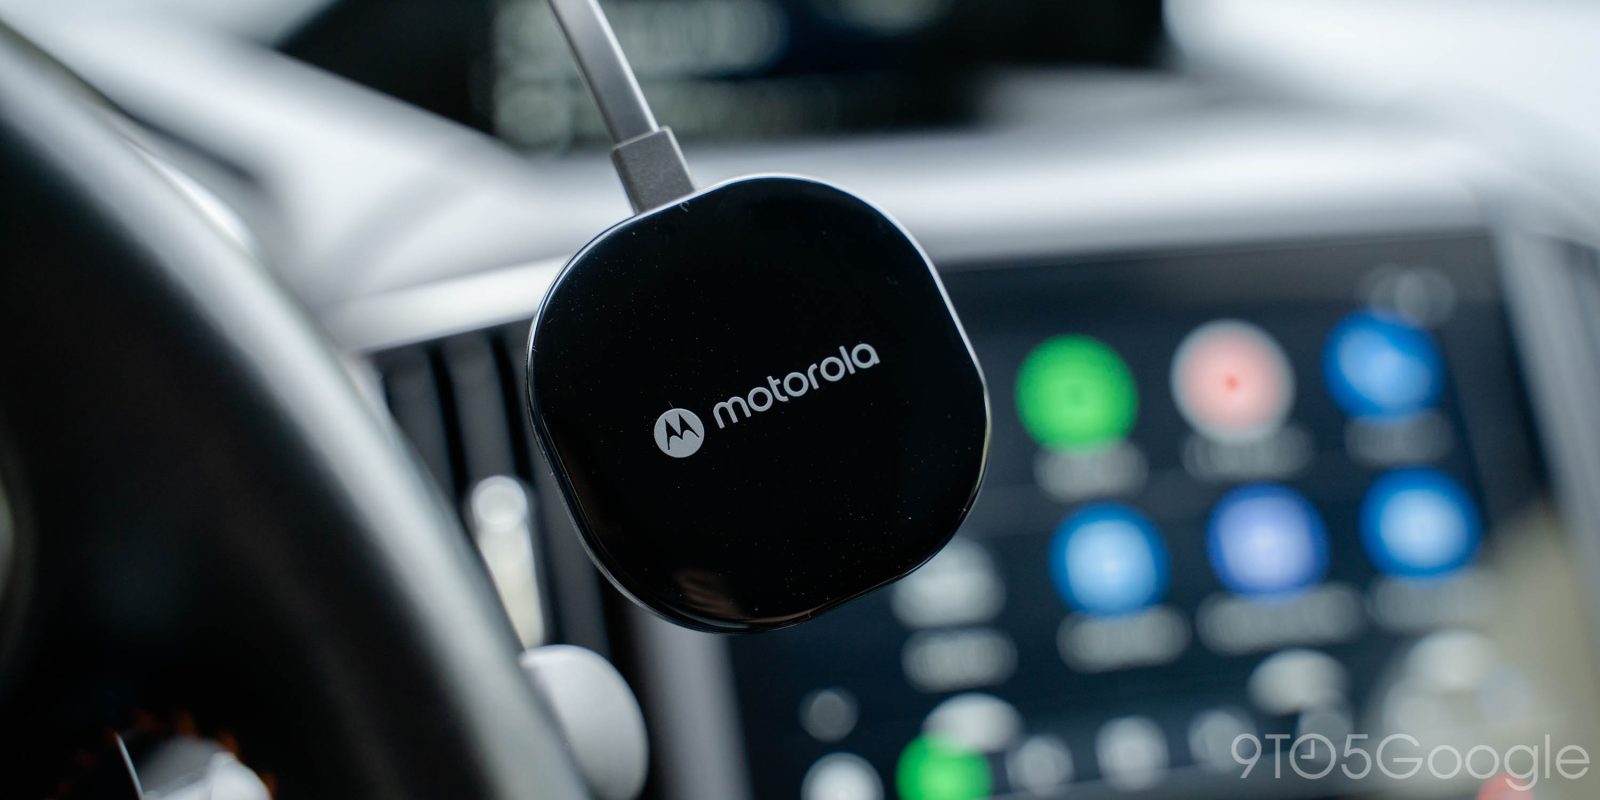 5 Best Wireless Android Auto Adapters for Your Car - Guiding Tech